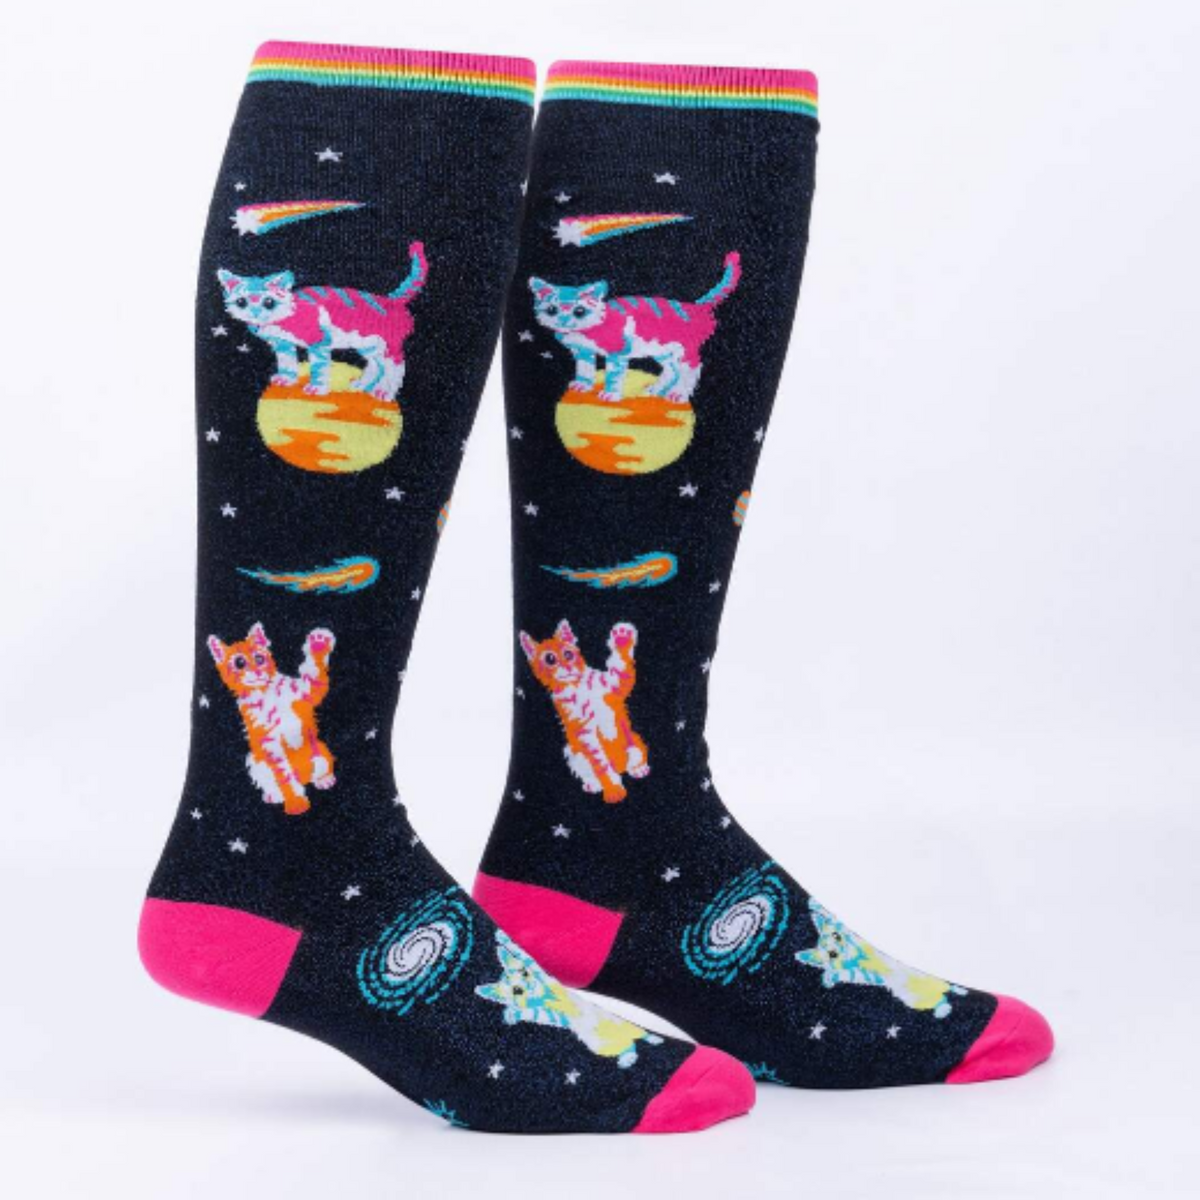 Sock It To Me Space Cats extra-stretchy knee sock featuring pink toe and heel with shimmery black background and kittens in outer space. Socks on display feet seen from side. 